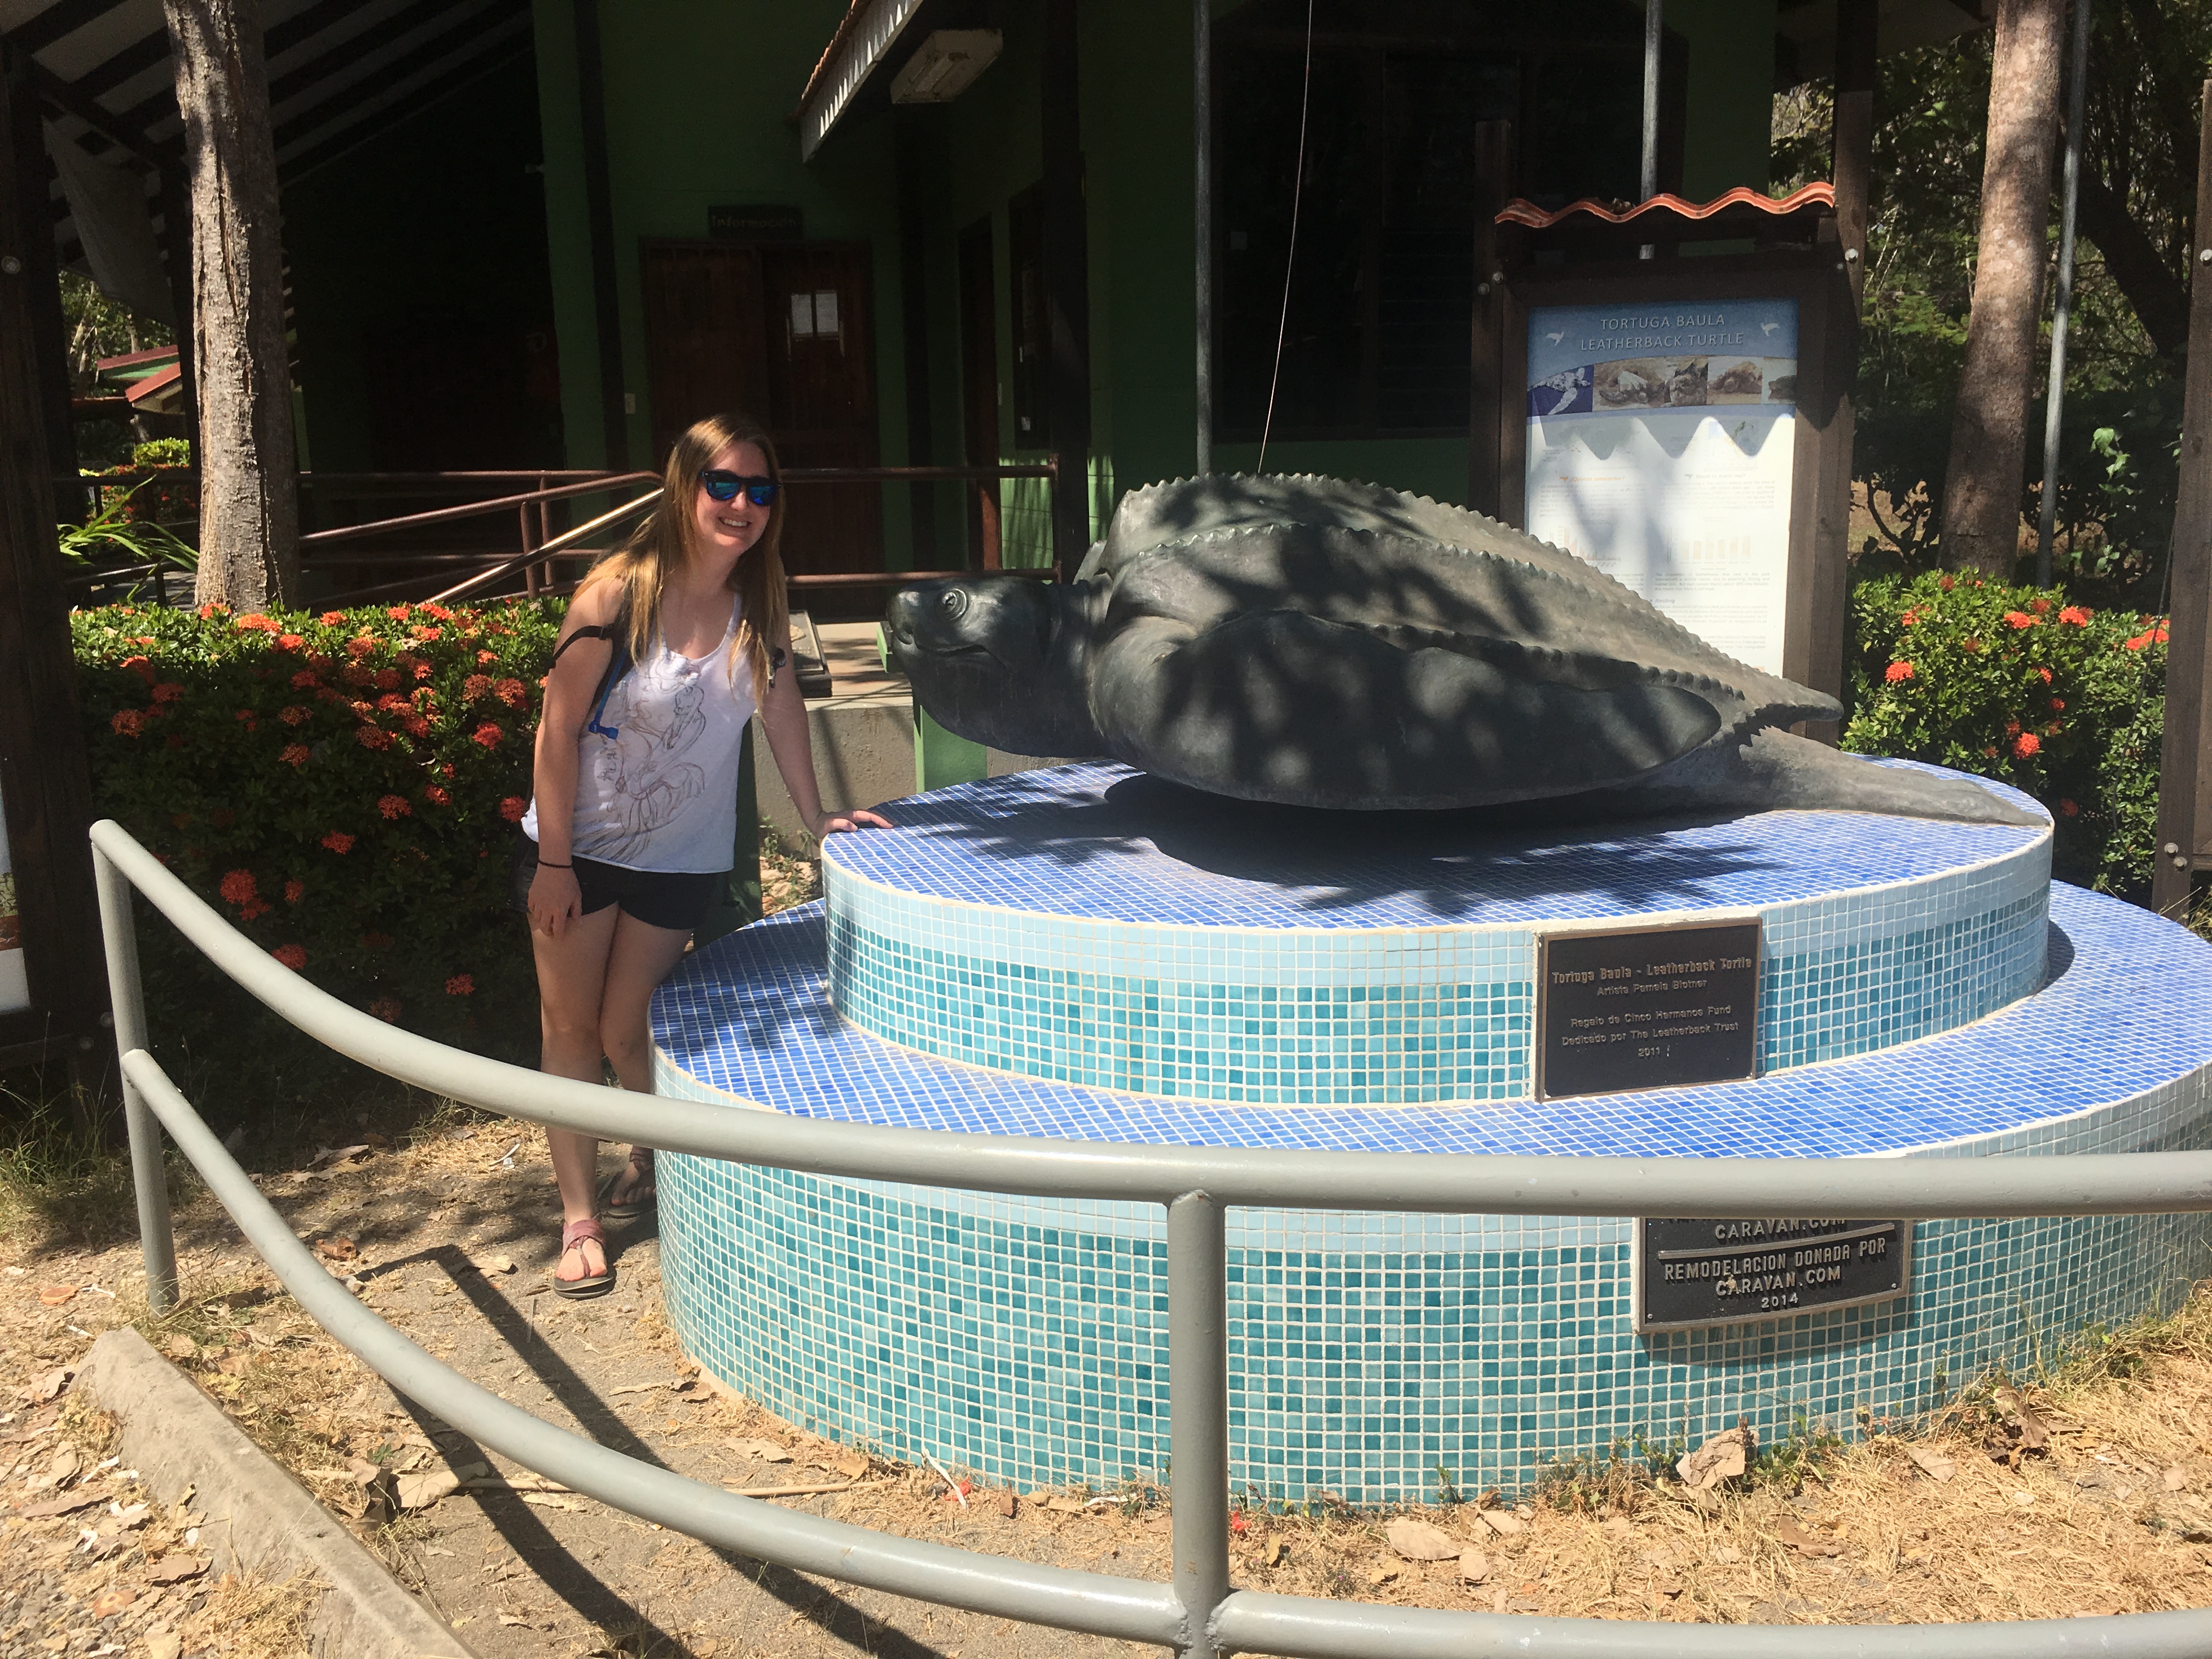 Lauren with full size leatherback statue